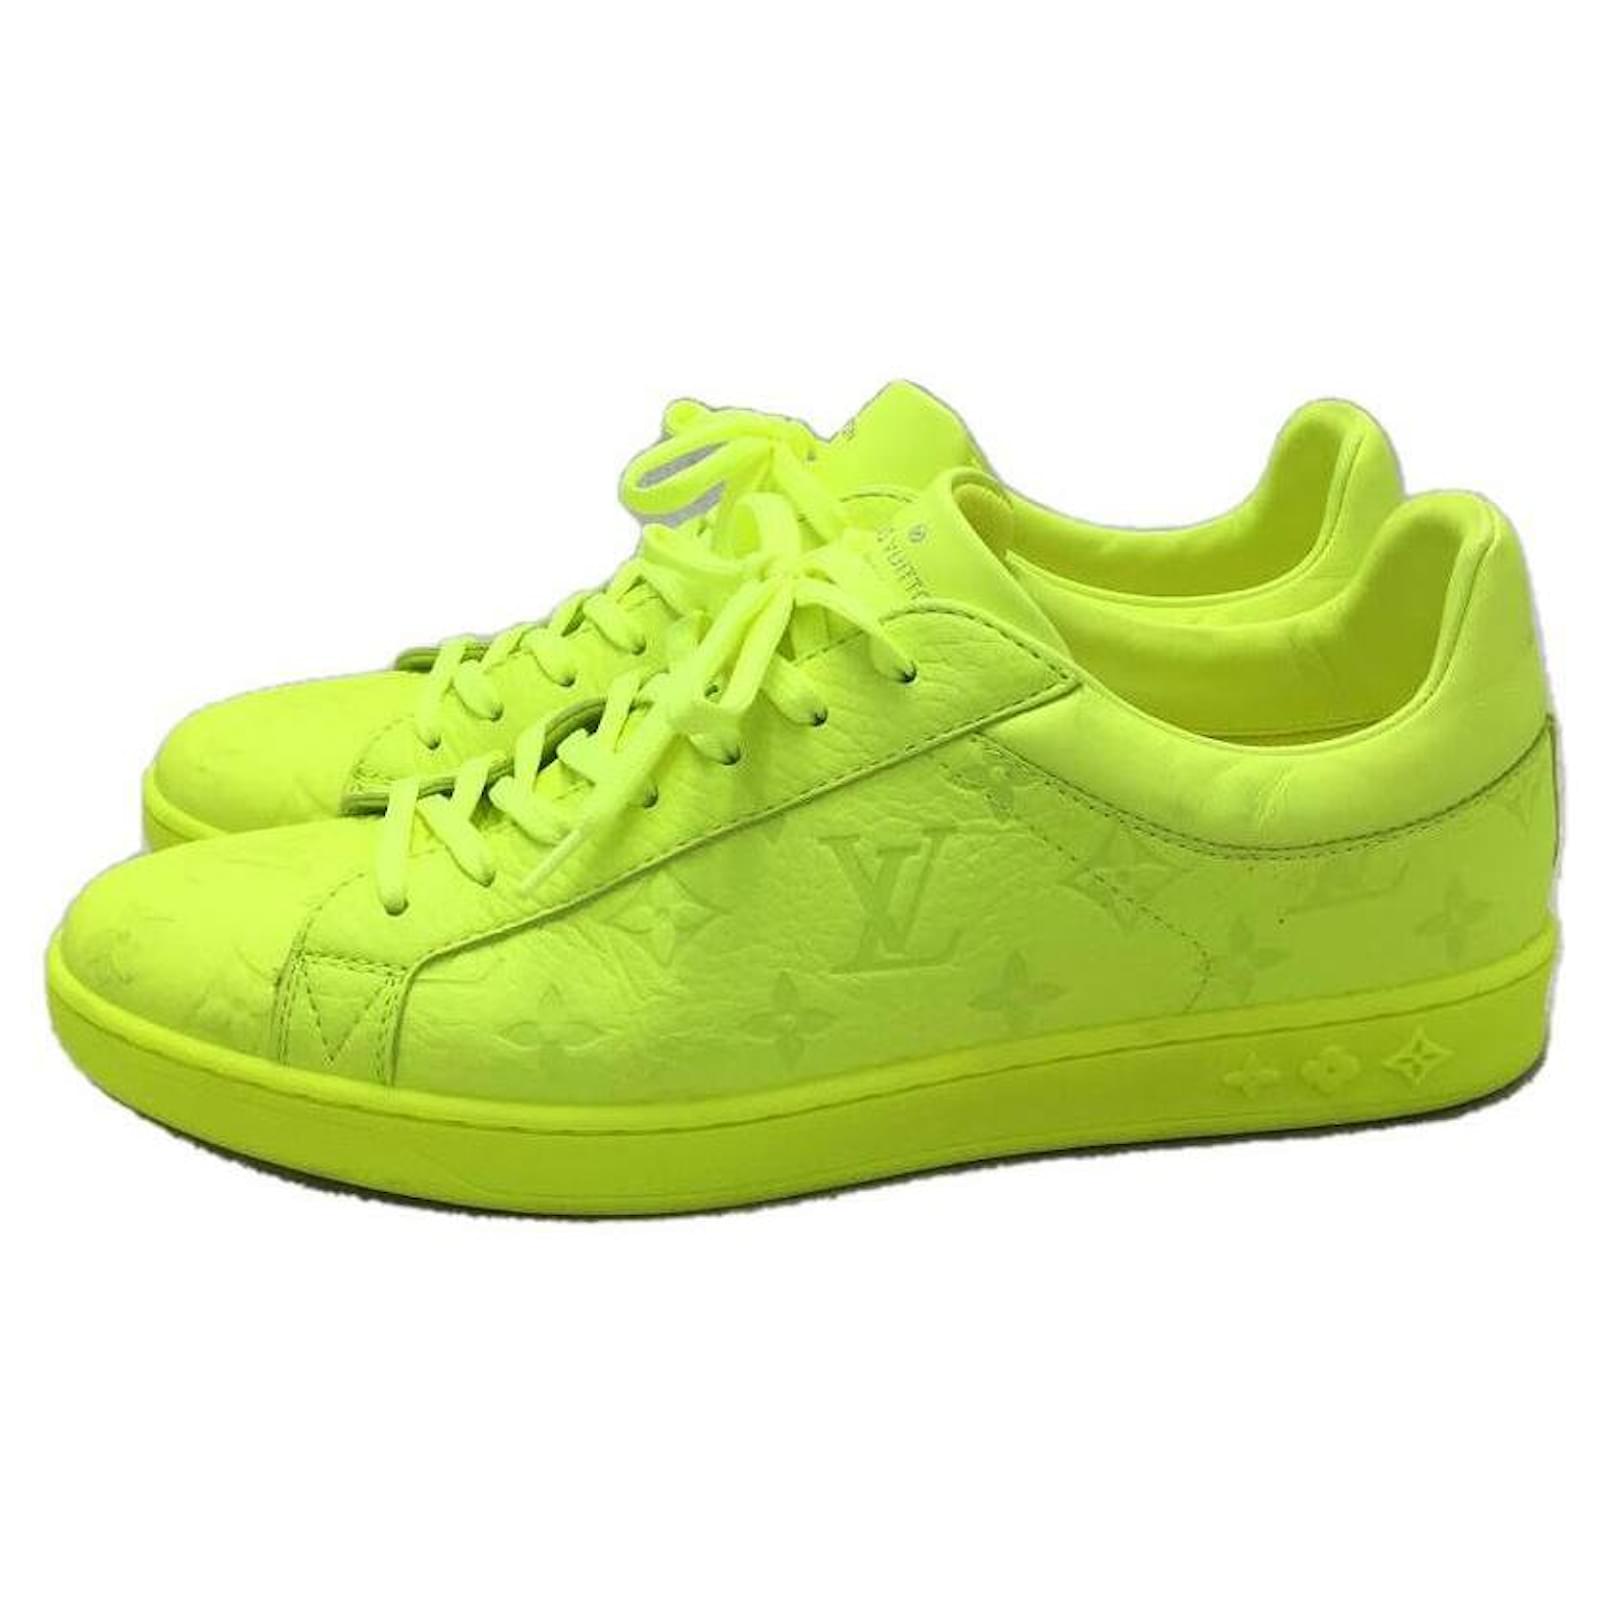 Run away low trainers Louis Vuitton Yellow size 41 EU in Other - 31760163